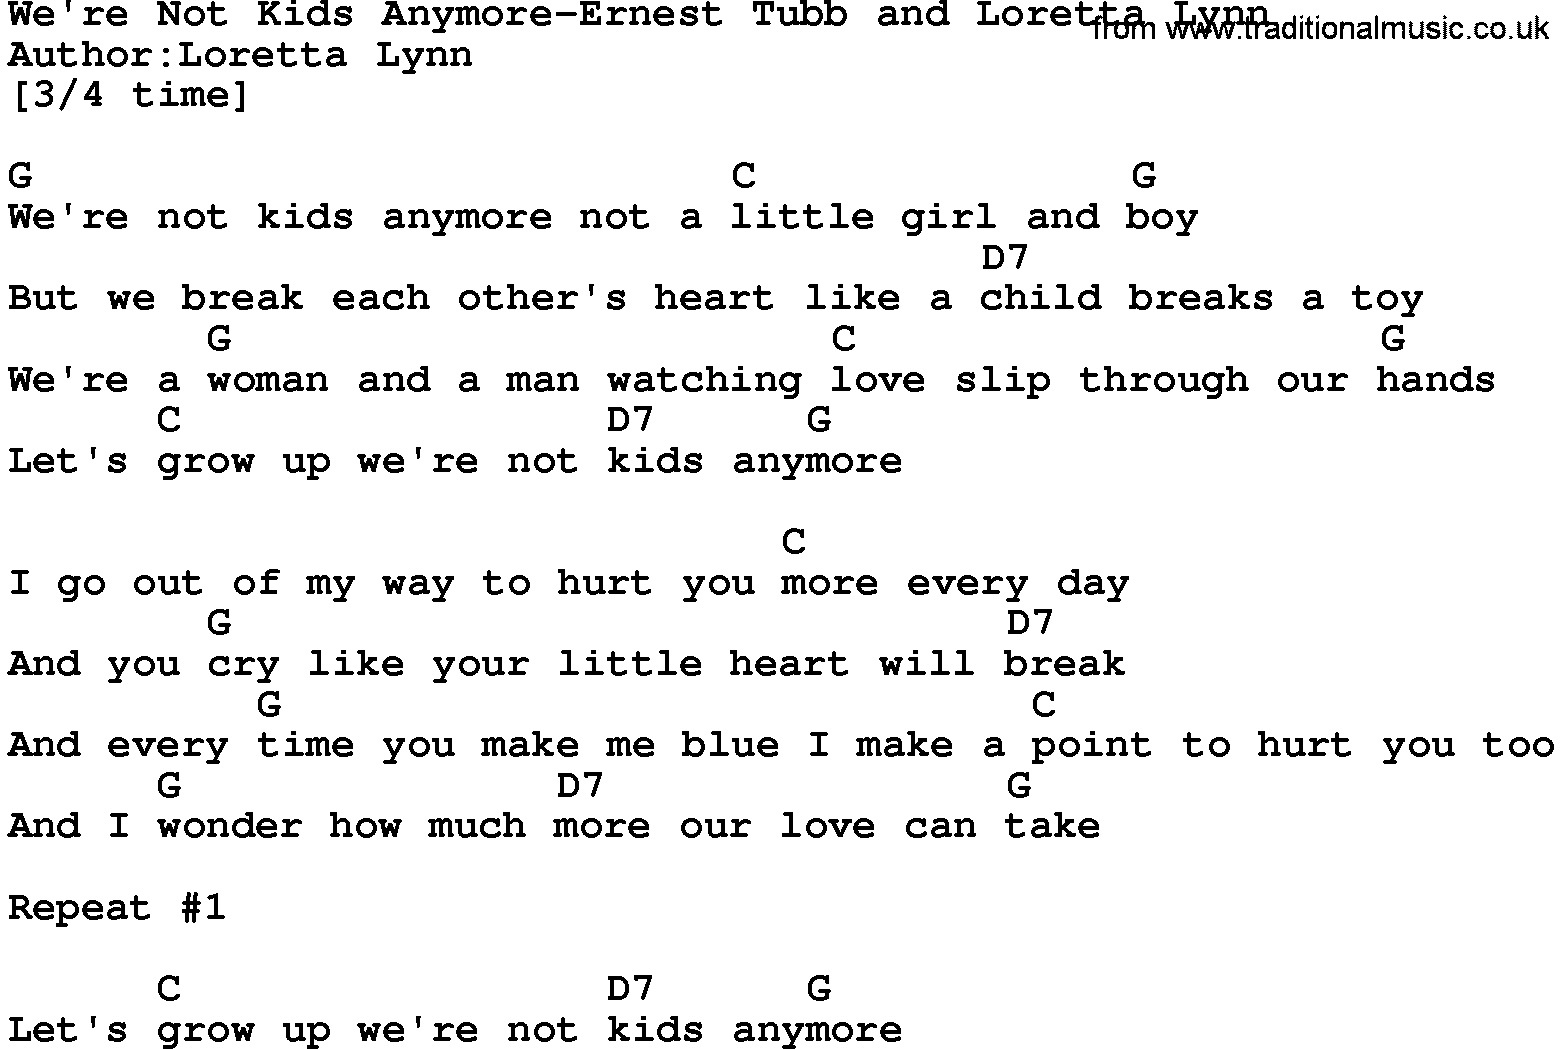 Country music song: We're Not Kids Anymore-Ernest Tubb And Loretta Lynn lyrics and chords